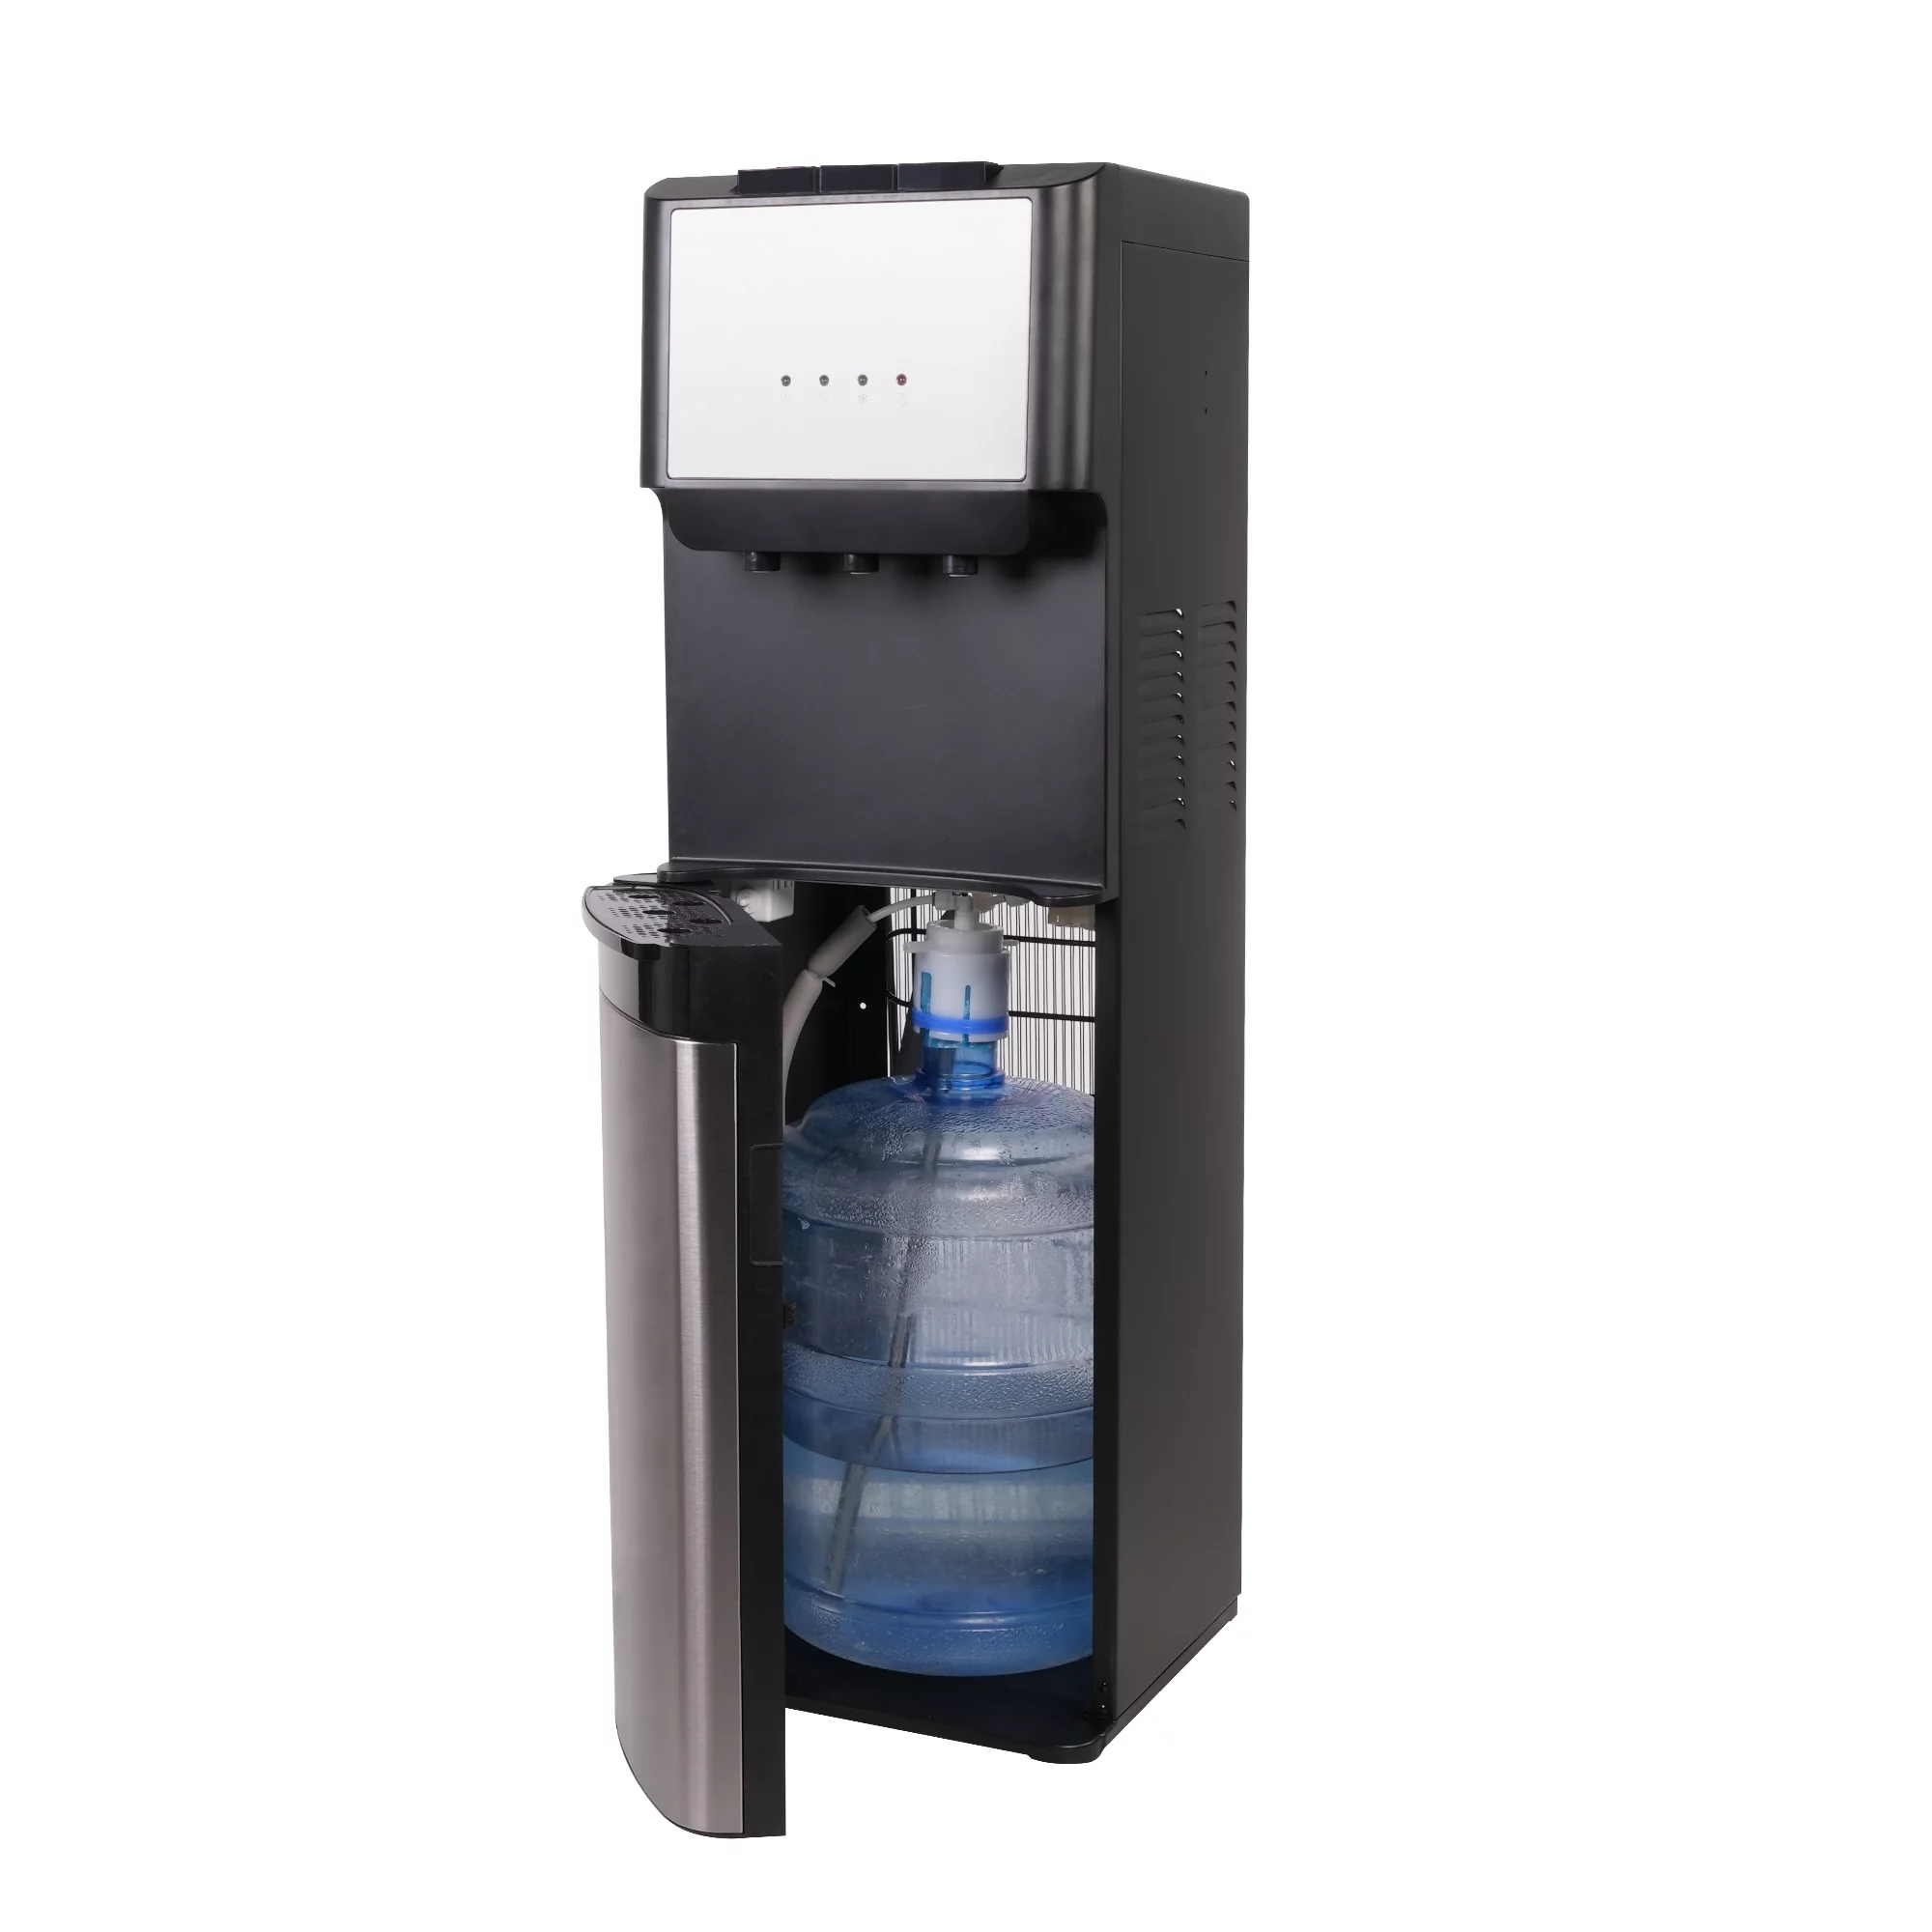 5 Gallon Bottom Loading Stainless Steel Water Cooler Dispenser with 3 Temperature Settings